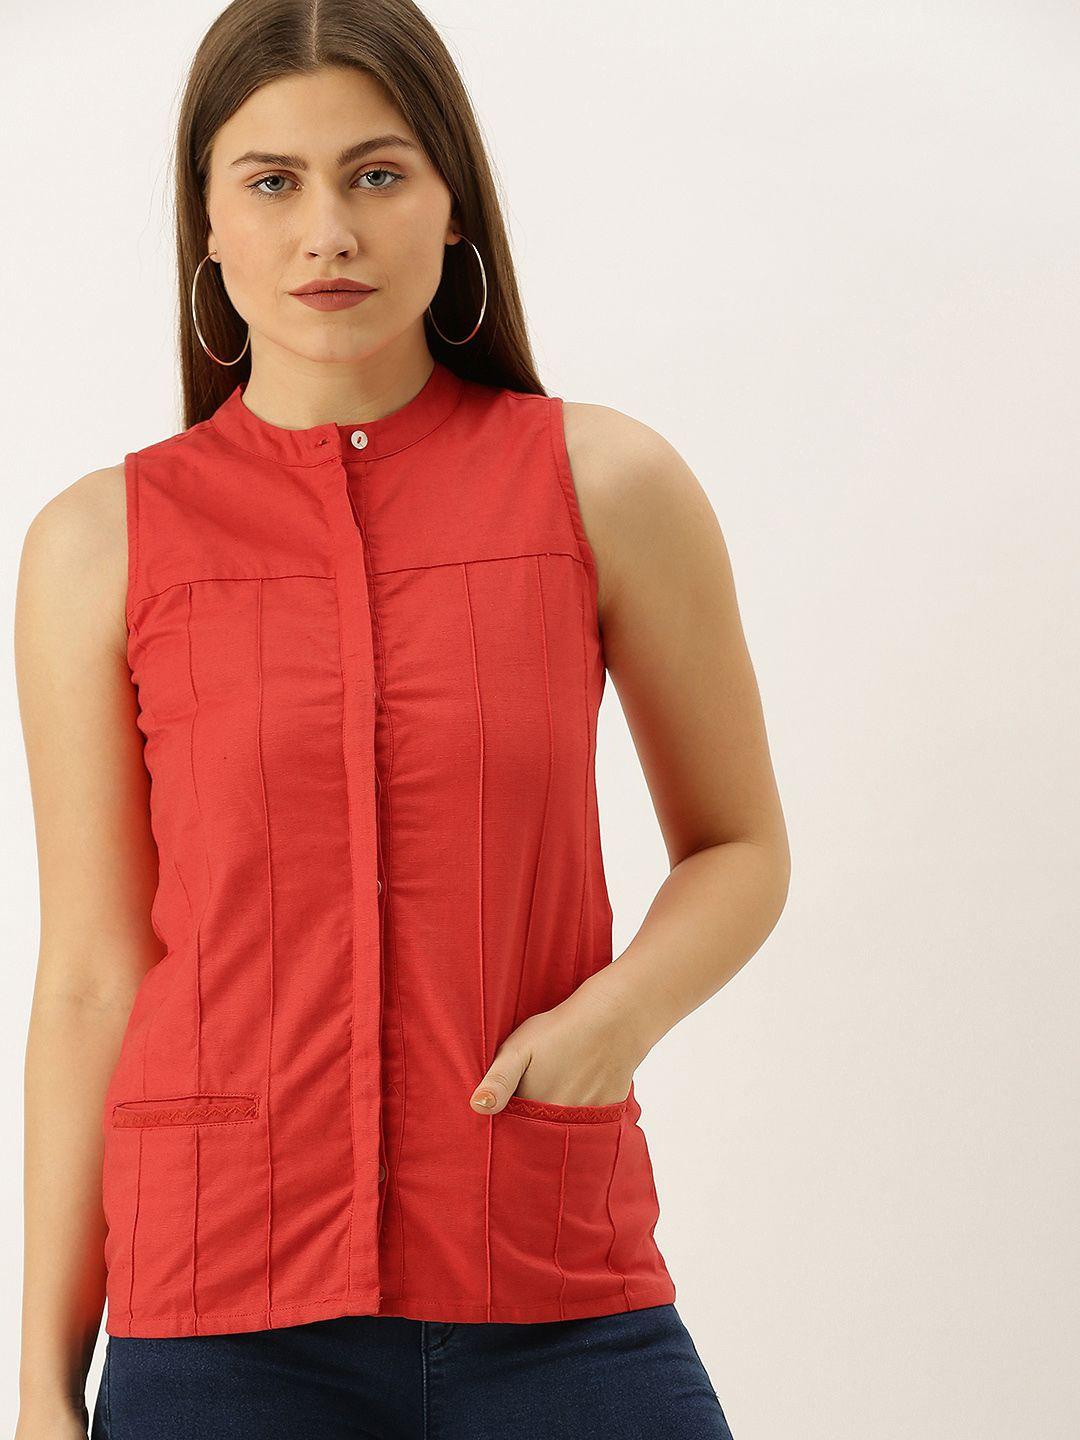 and-women-red-solid-shirt-style-top